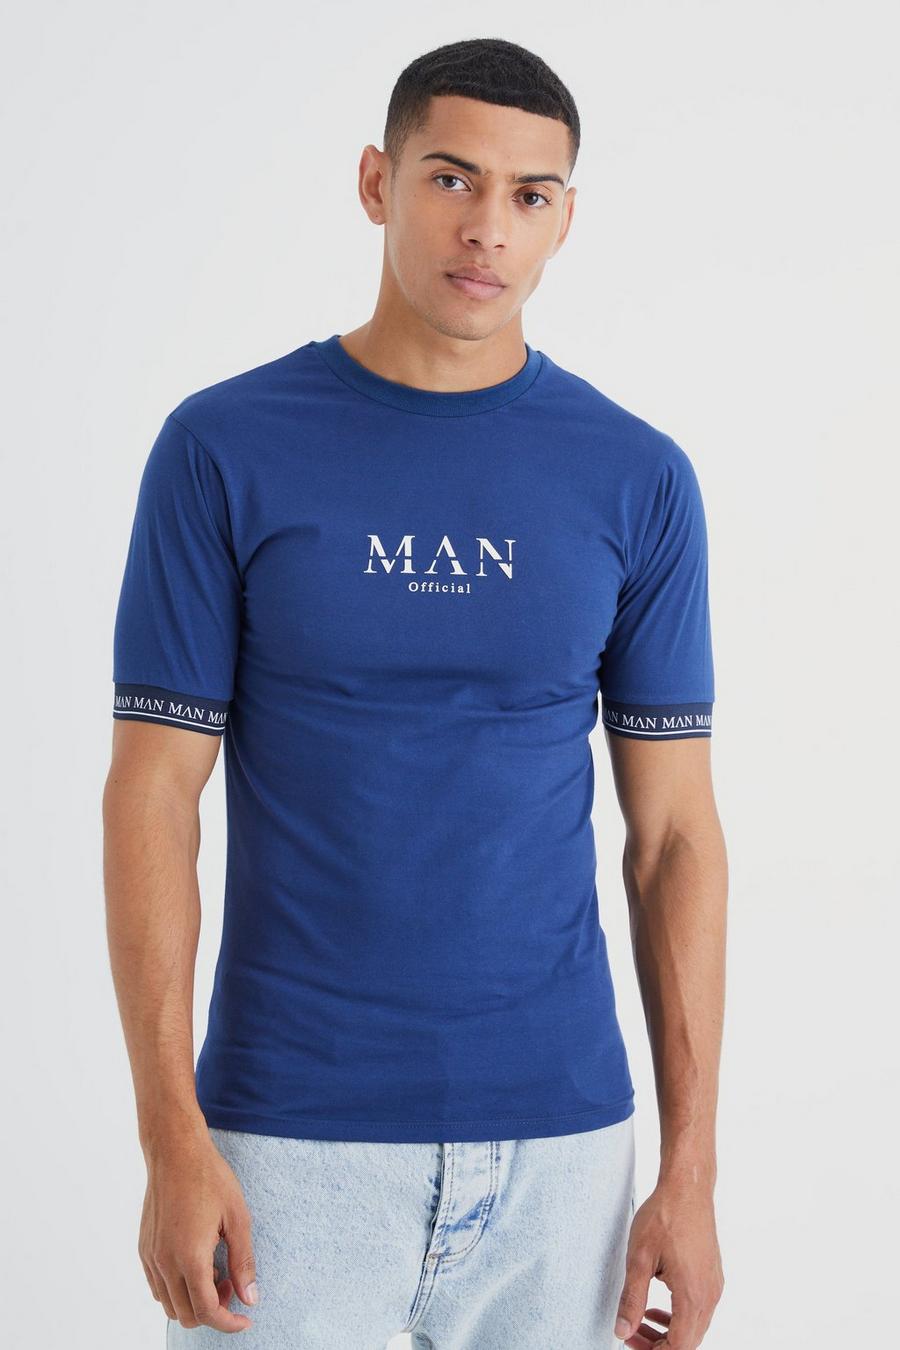 Muscle-Fit Man Gold T-Shirt, Navy image number 1